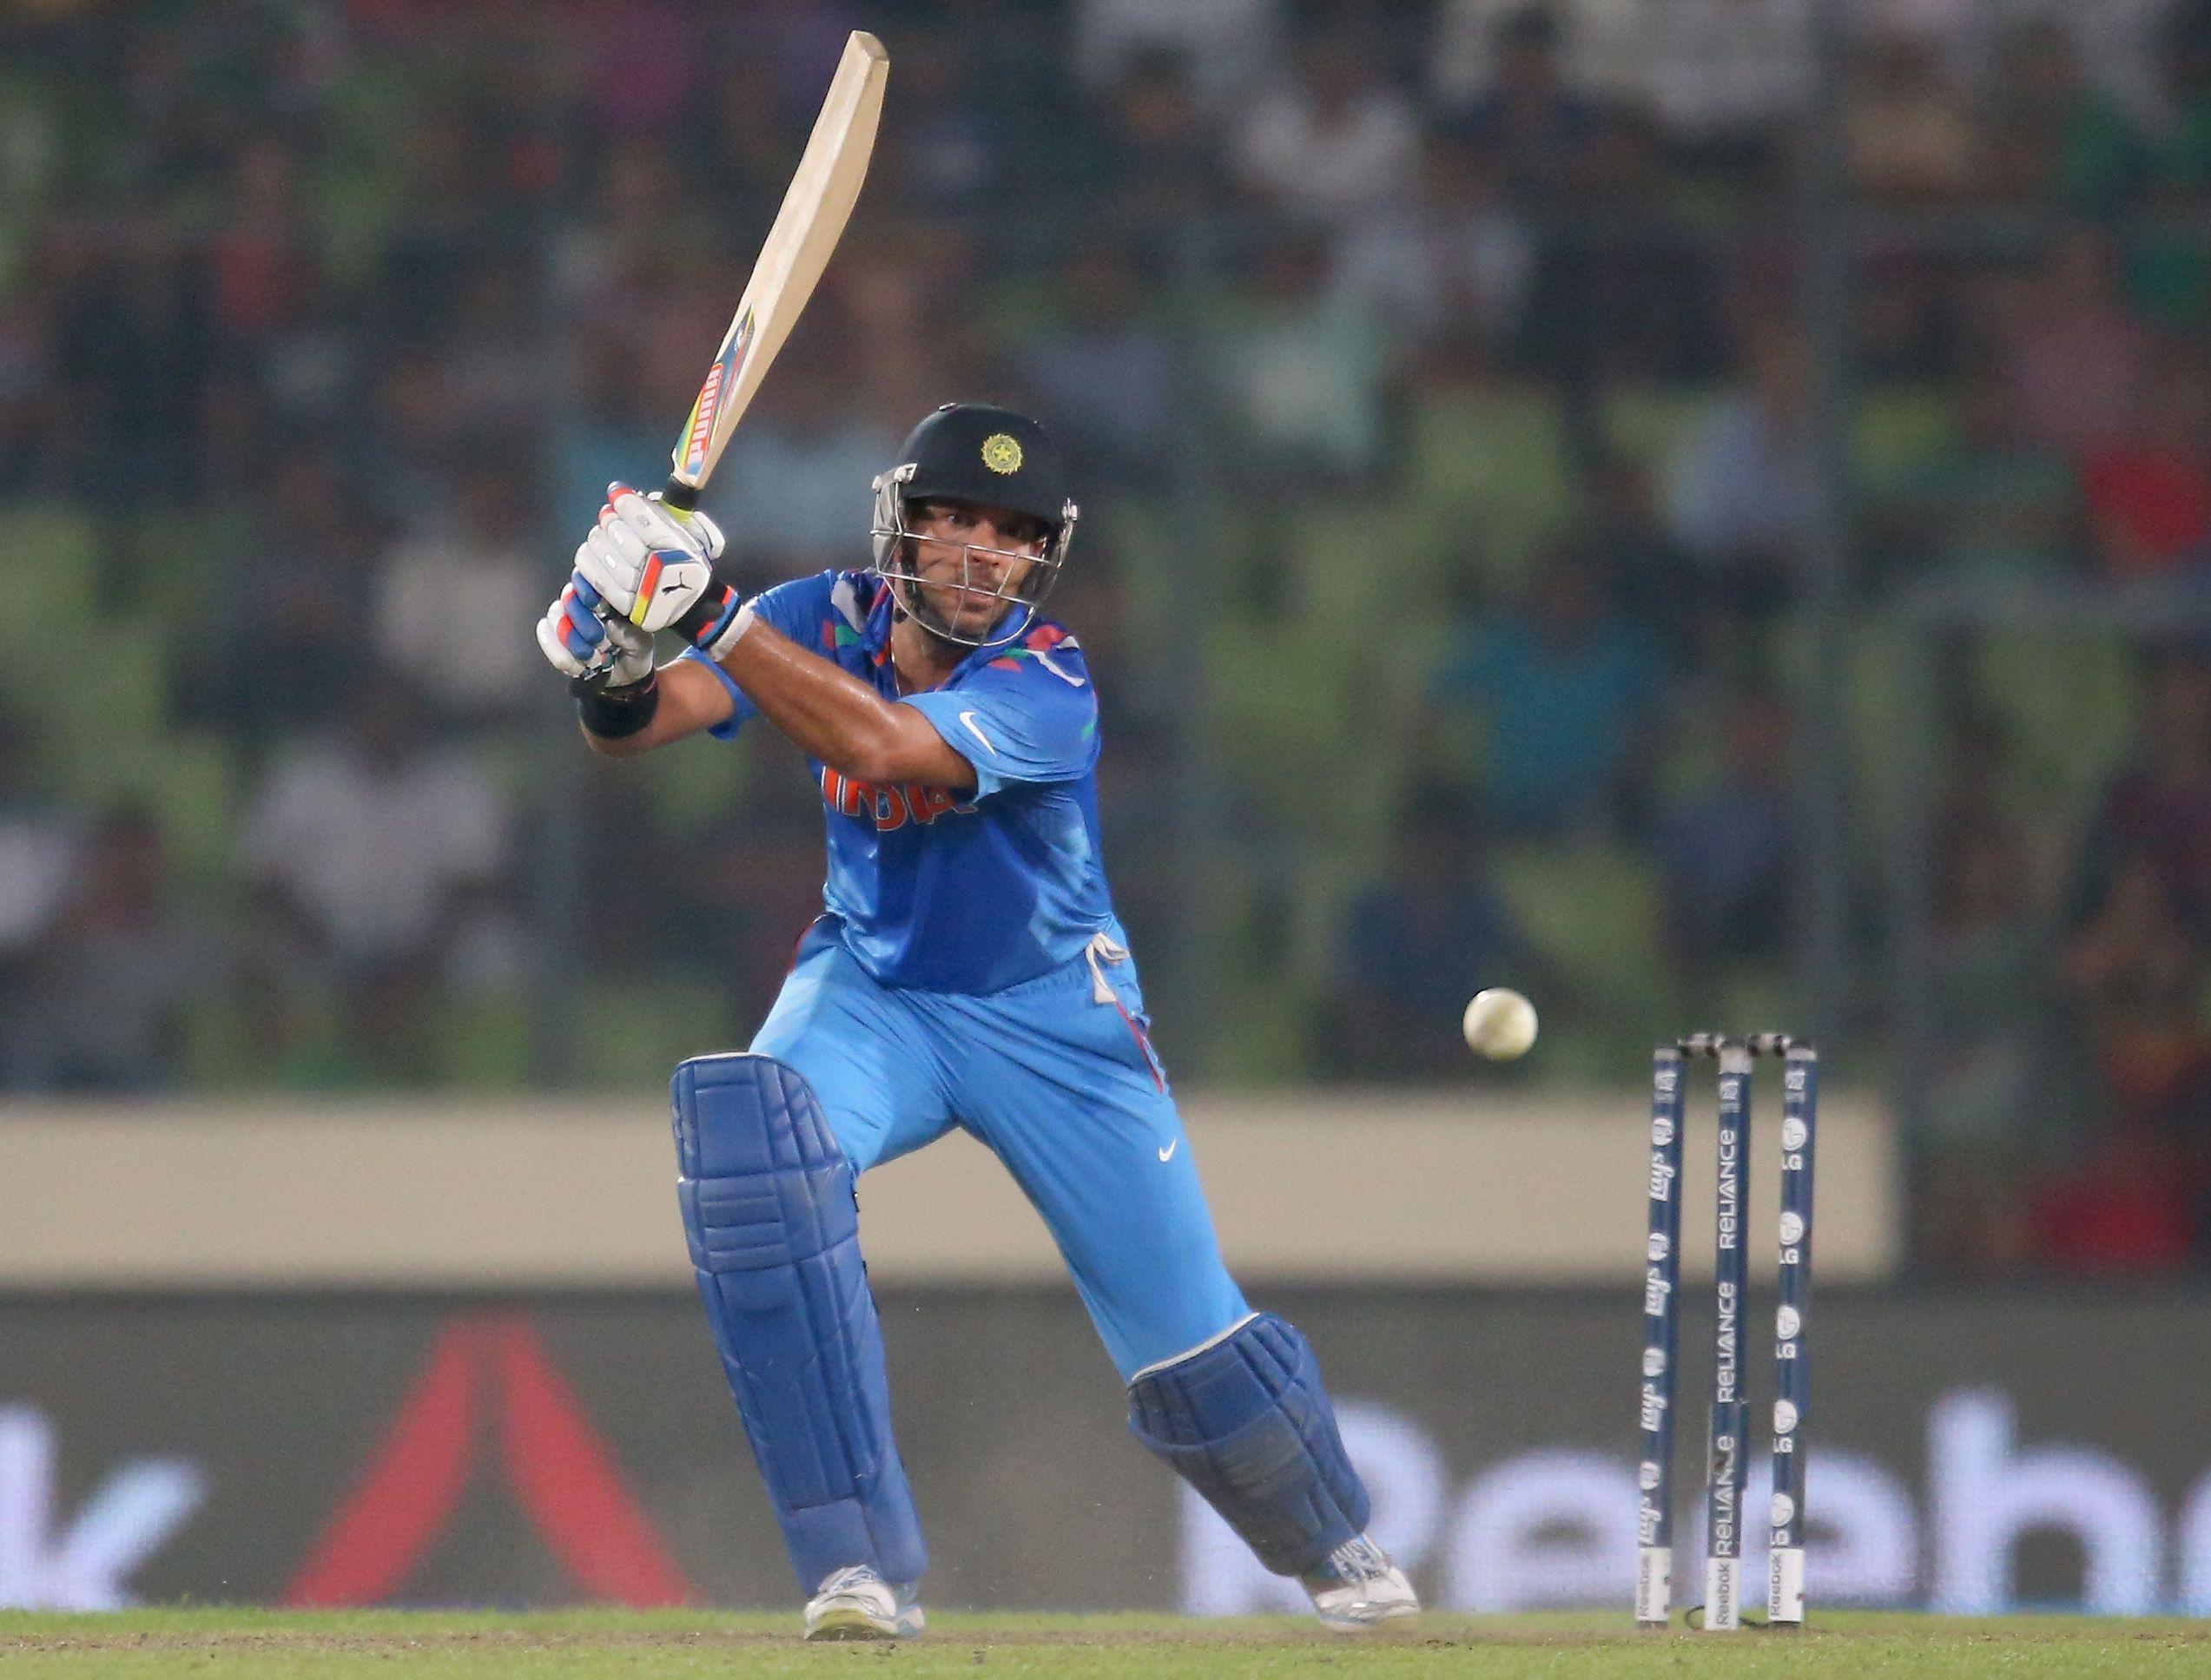 Yuvraj Singh Indian Cricket Player after Century in One Day International  Match Wallpapers | HD Wallpapers